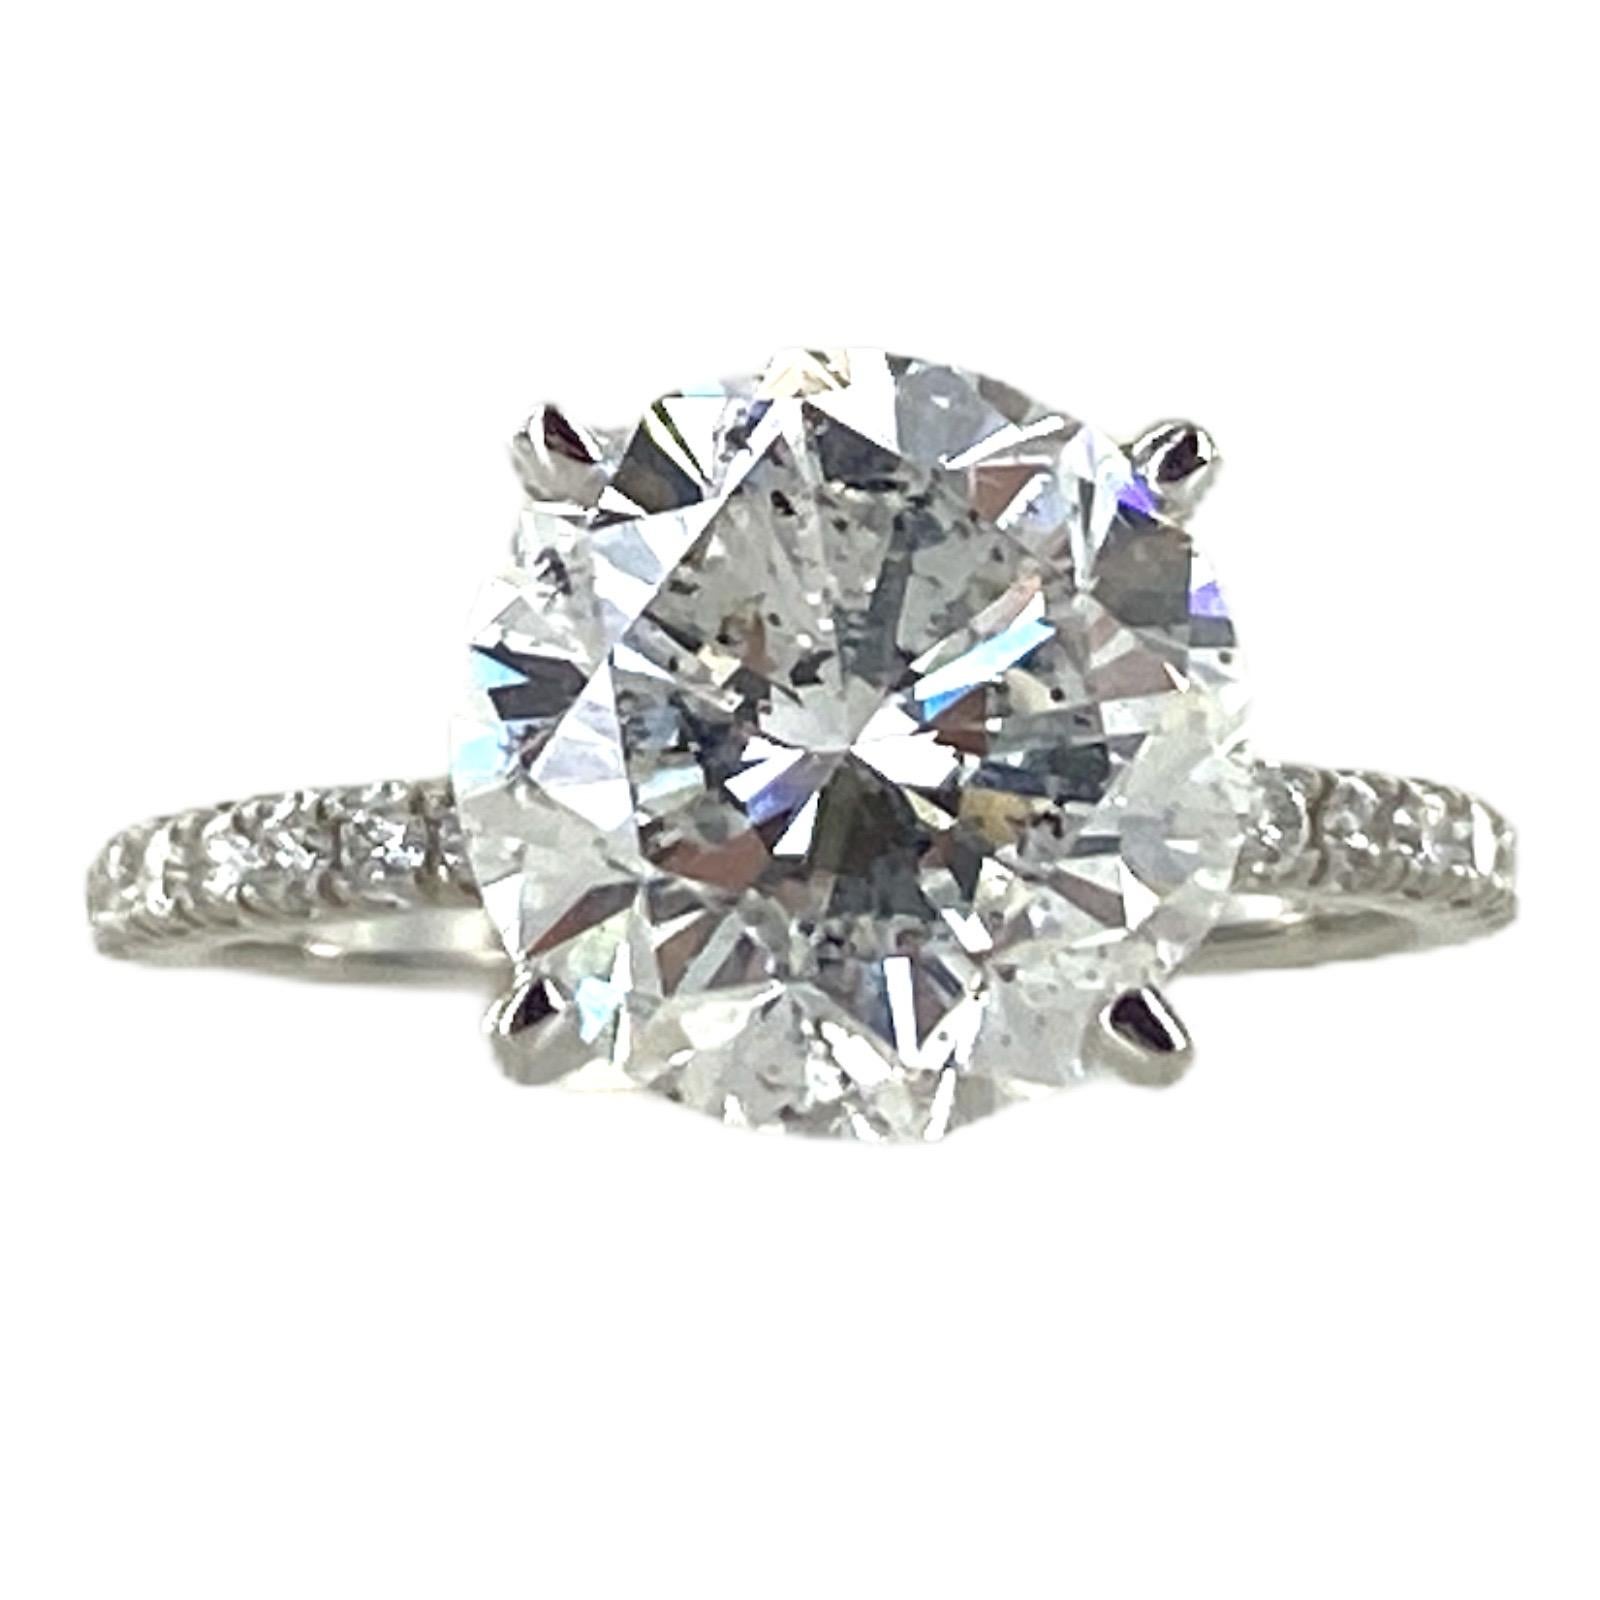 Stunning diamond engagement ring fashioned in 18 karat white gold. The round brilliant cut diamond weighs 4.04 carats and is graded F color and I1 clarity by the GIA. The white gold mounting features 16 round brilliant cut diamonds weighing .20